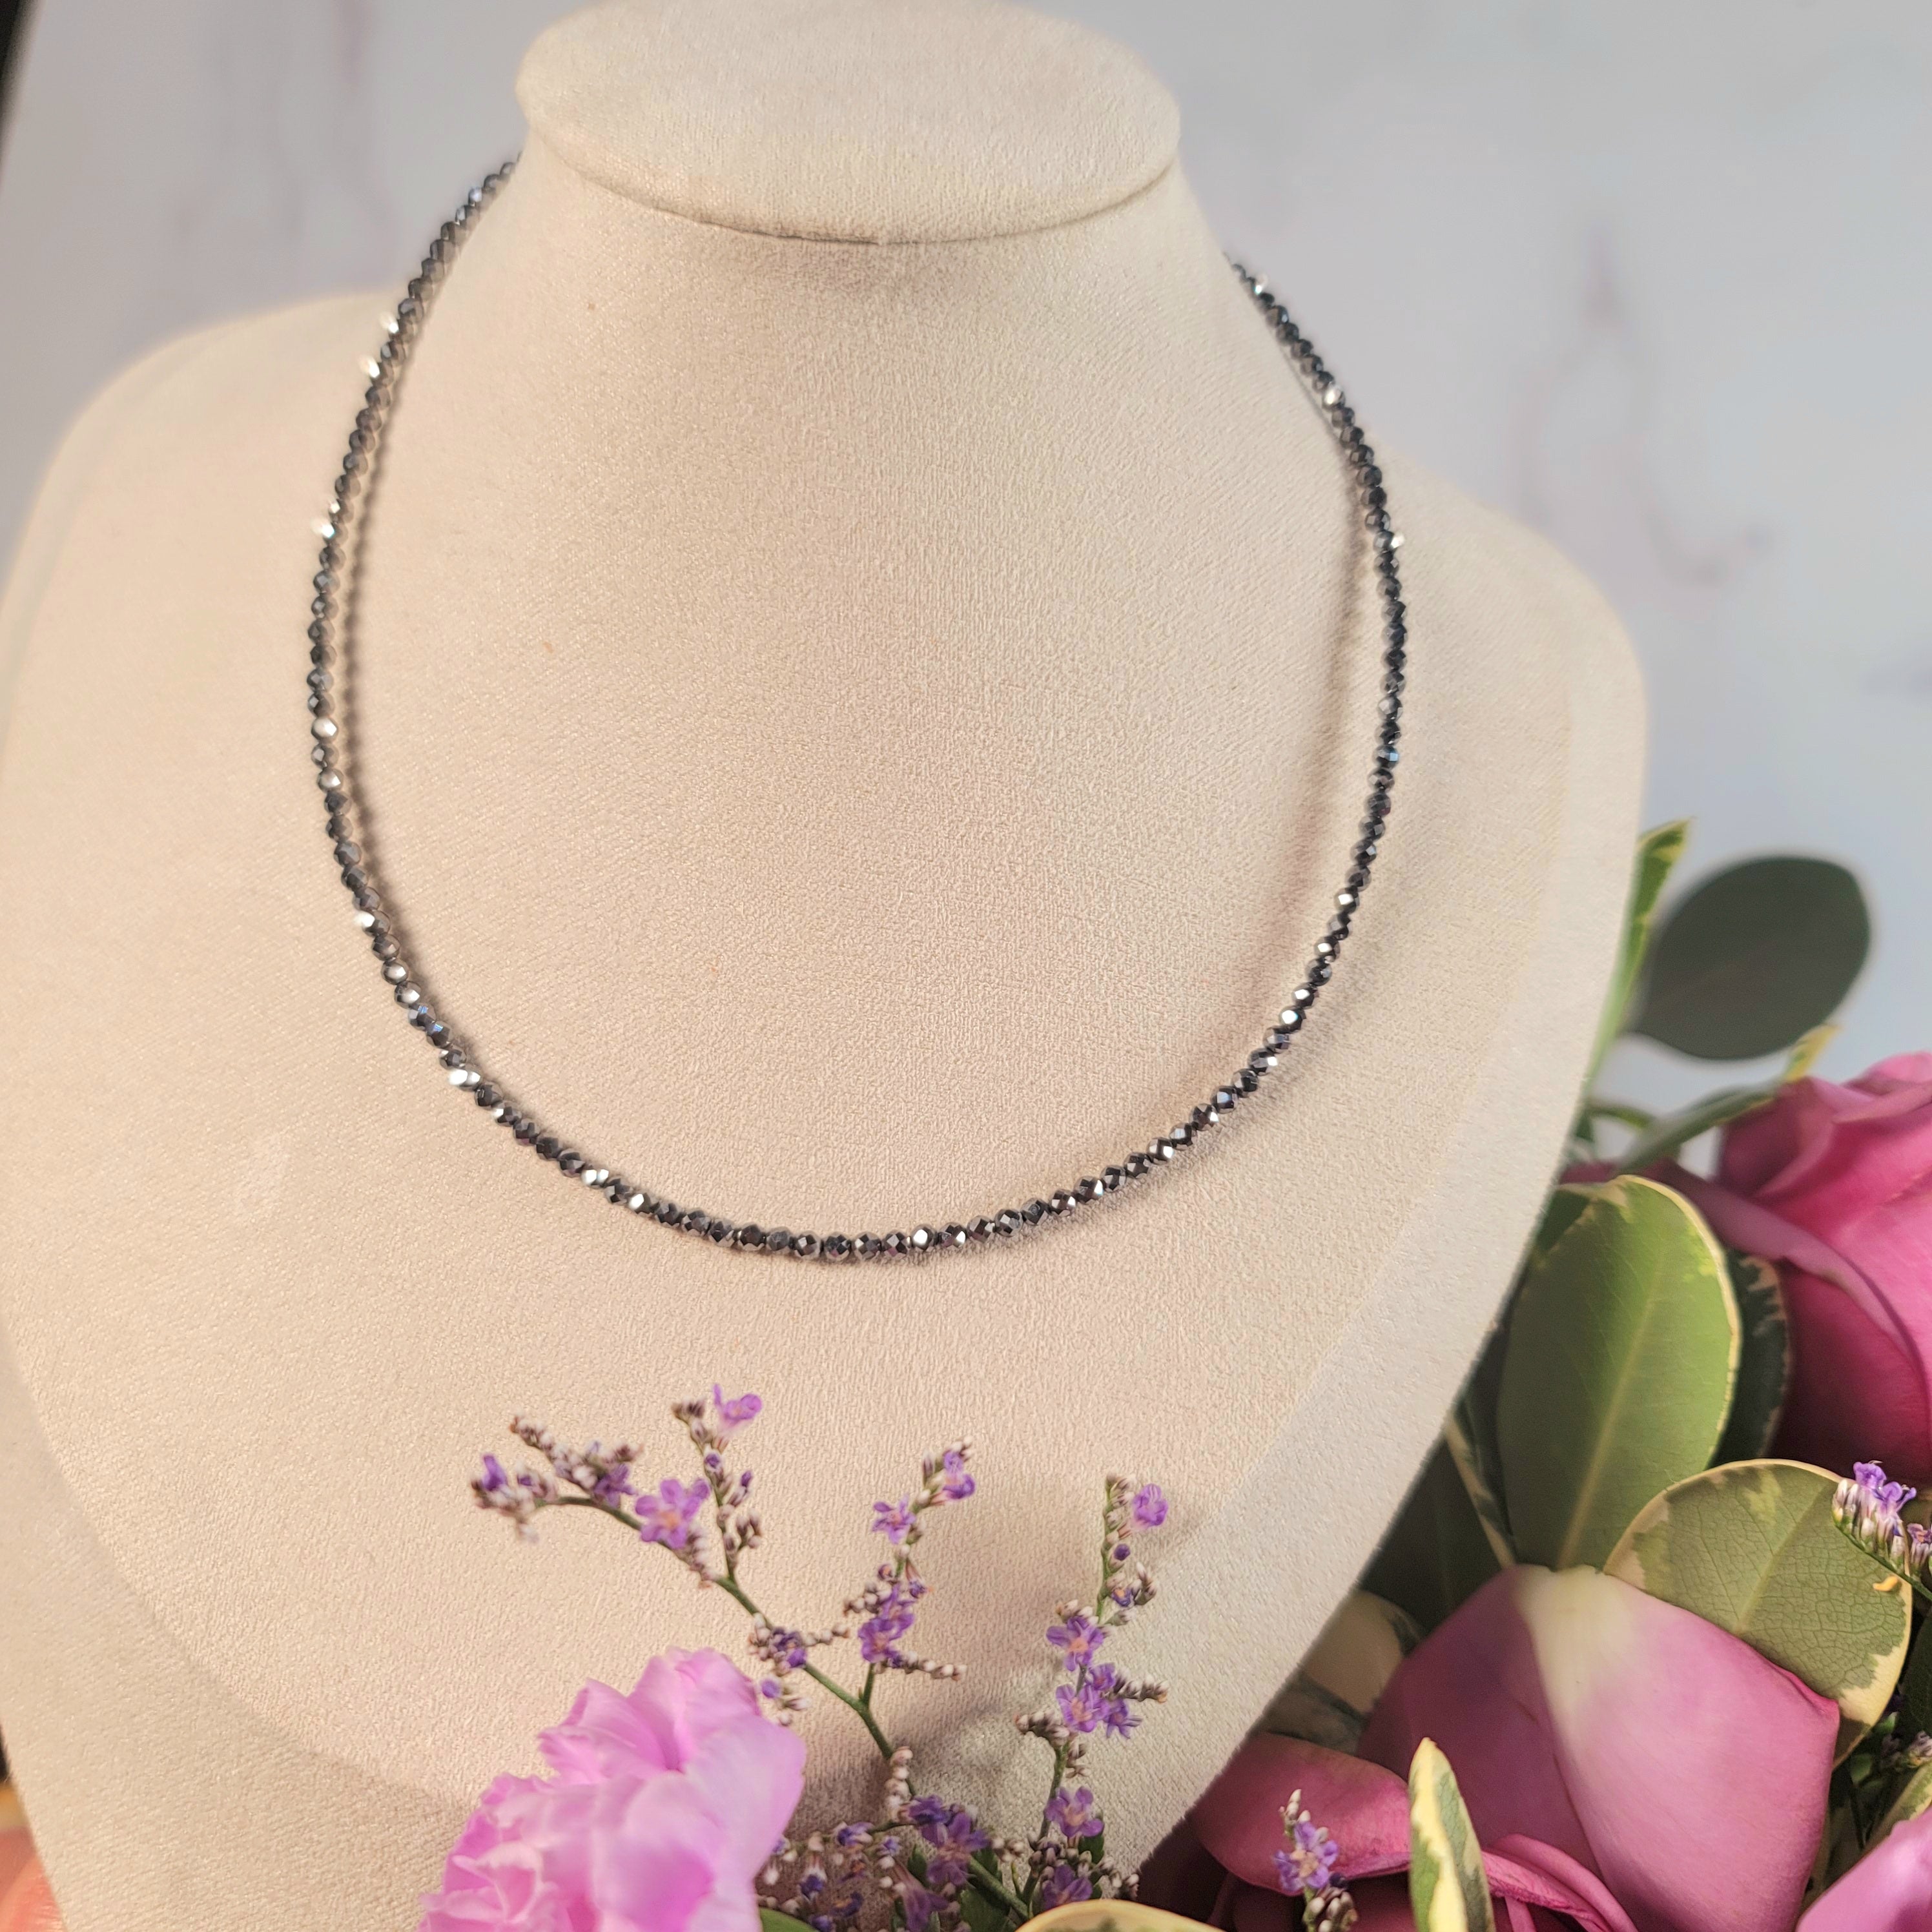 Hematite Micro Faceted Choker/Layering Necklace .925 Silver for Manifestation of Dreams into Reality